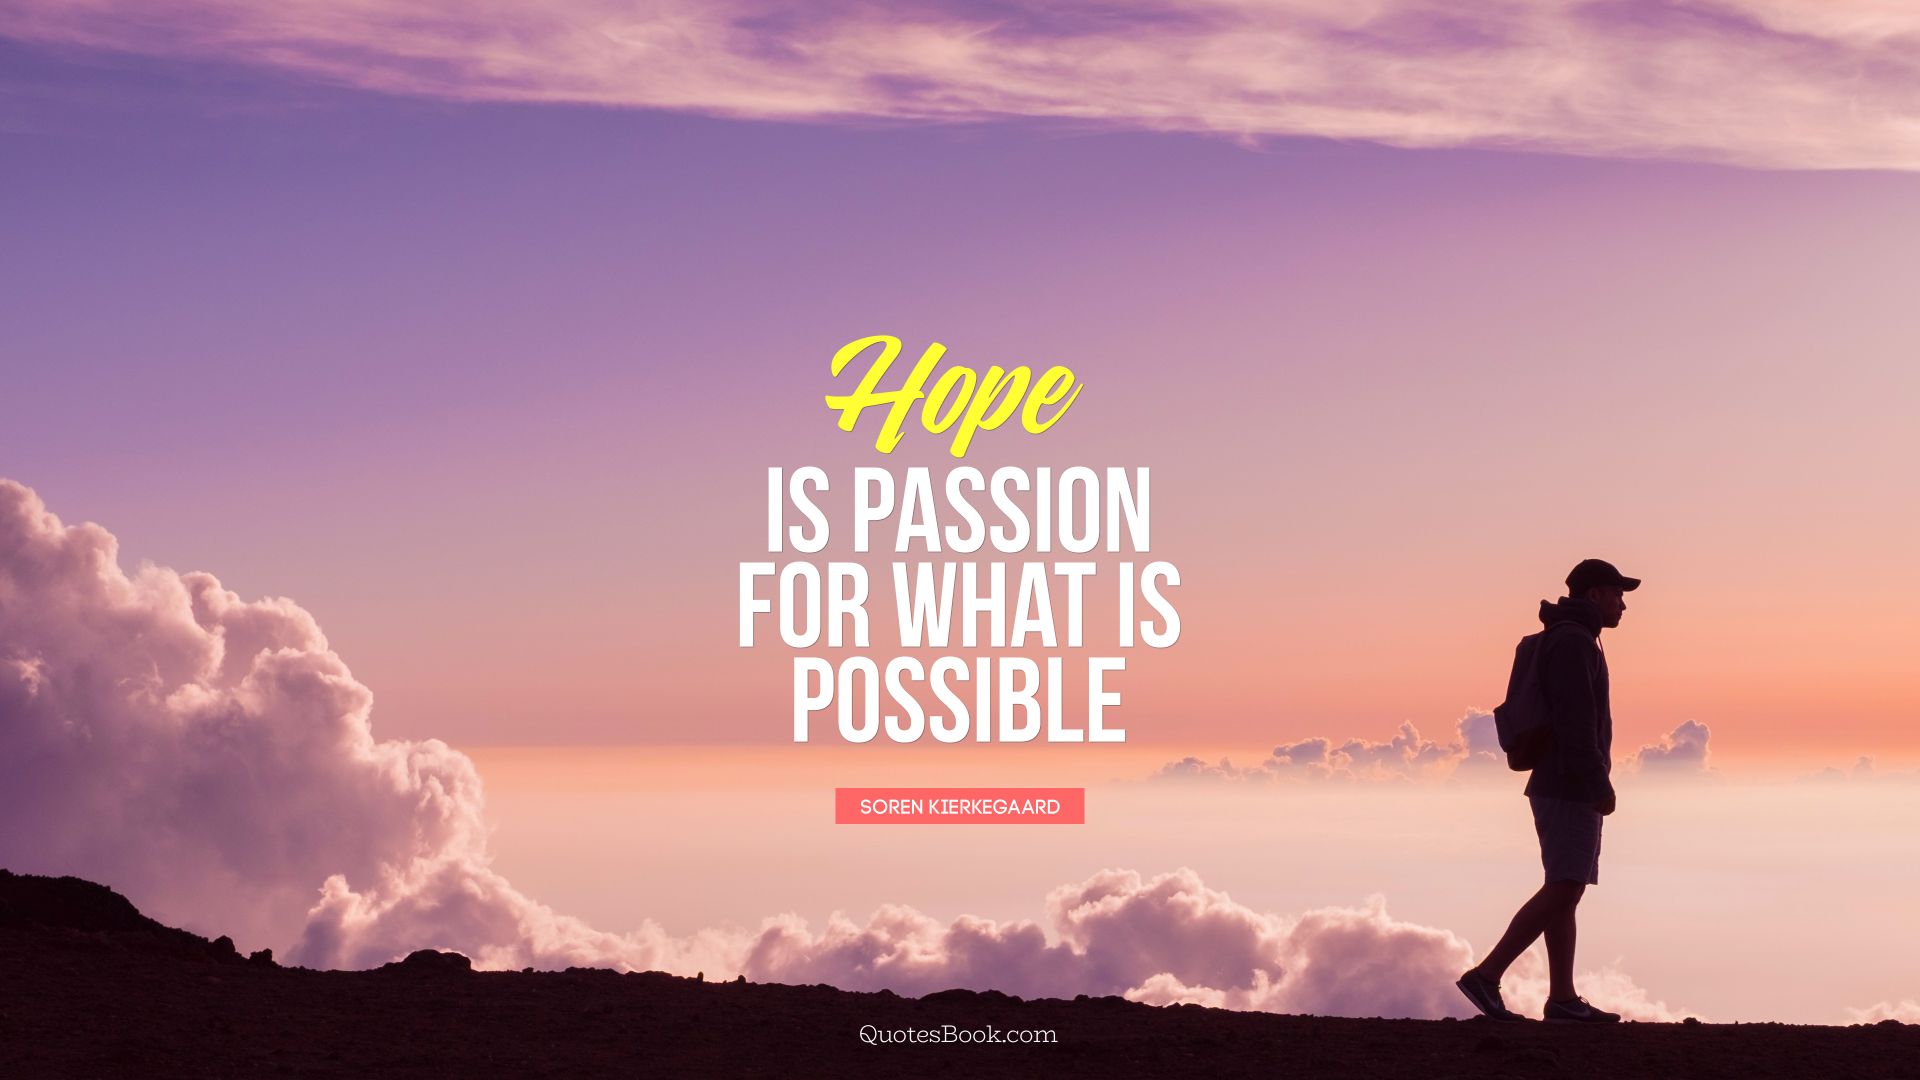 Hope is passion for what is possible. - Quote by Soren Kierkegaard